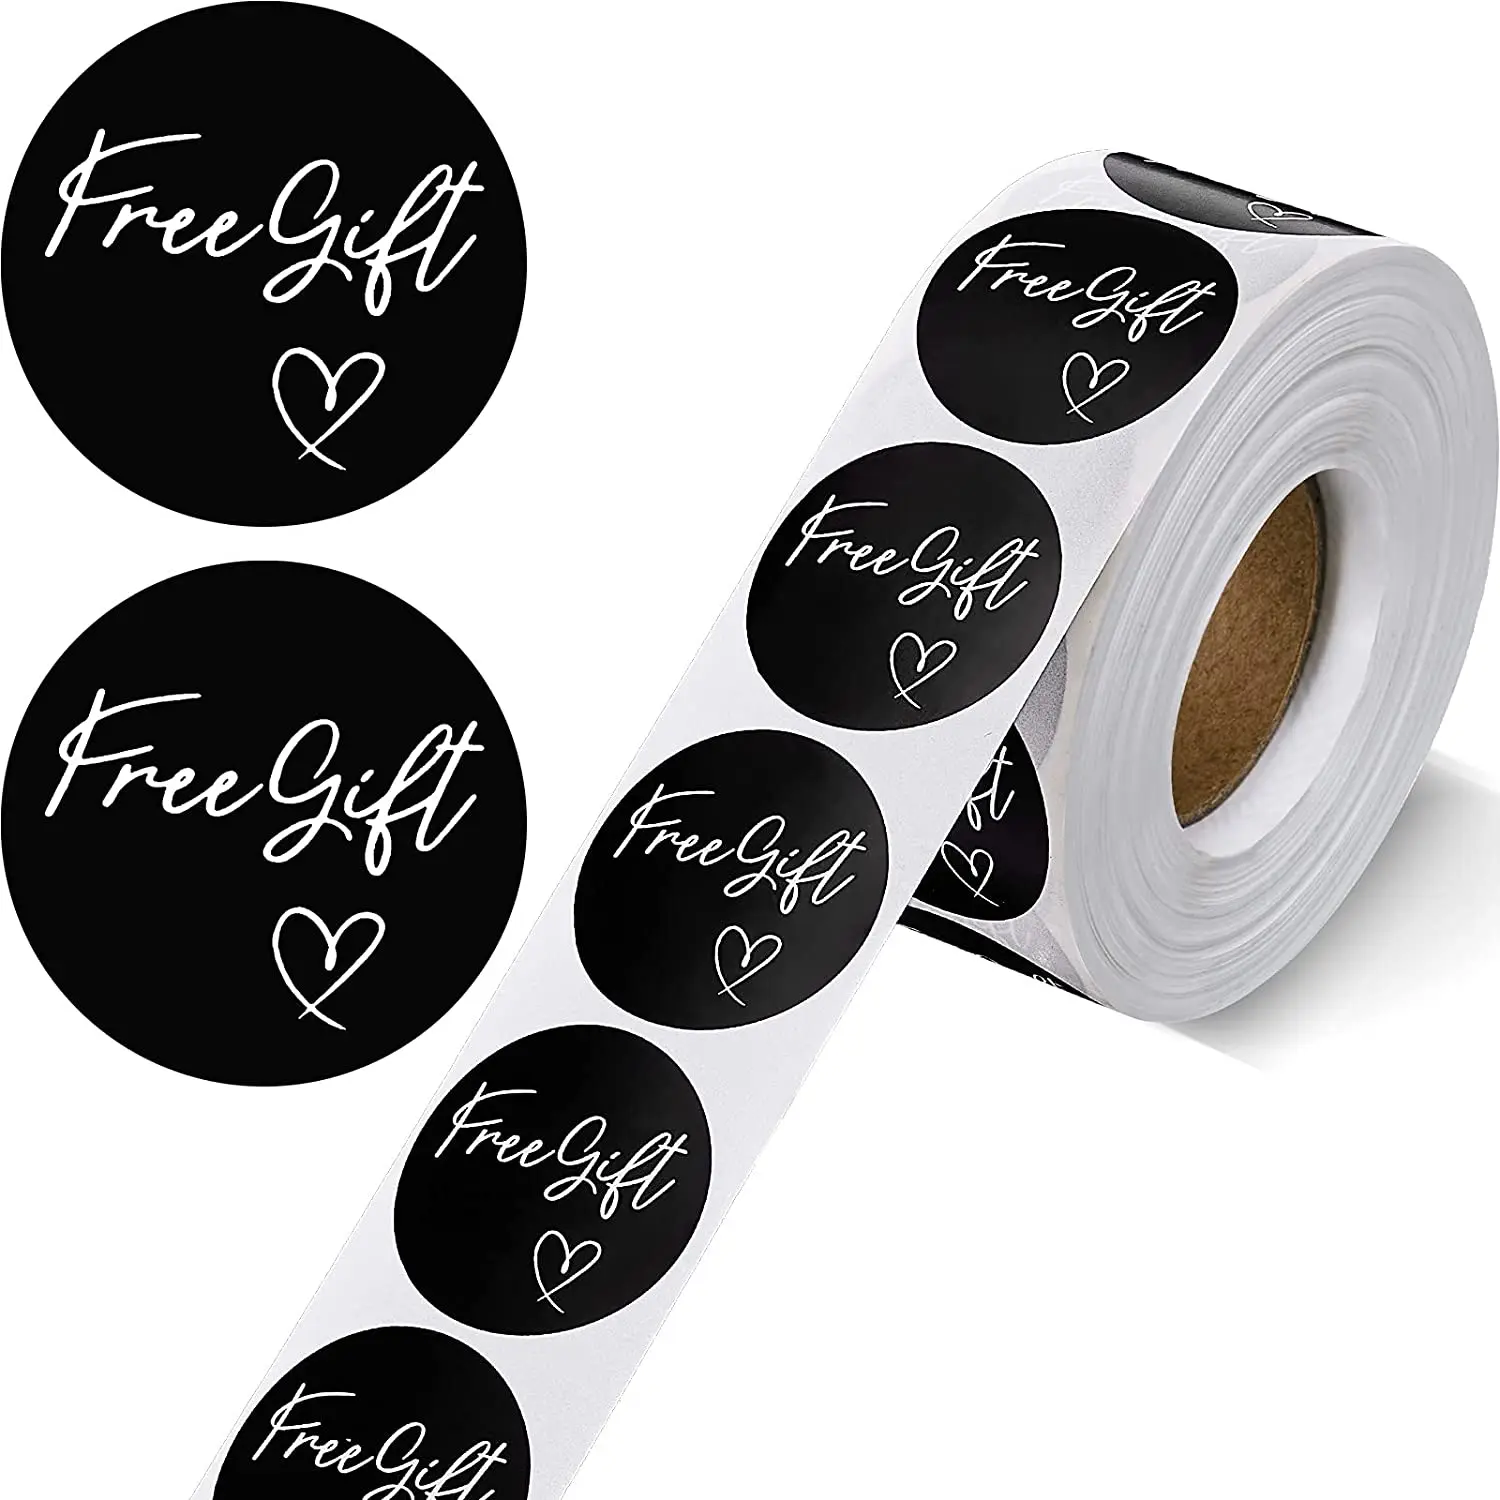 

Free Gift Stickers Thank You Business Sticker Roll 500pcs Round Self-Adhesive Sealing Labels for Packing Mailing Envelopes Tags